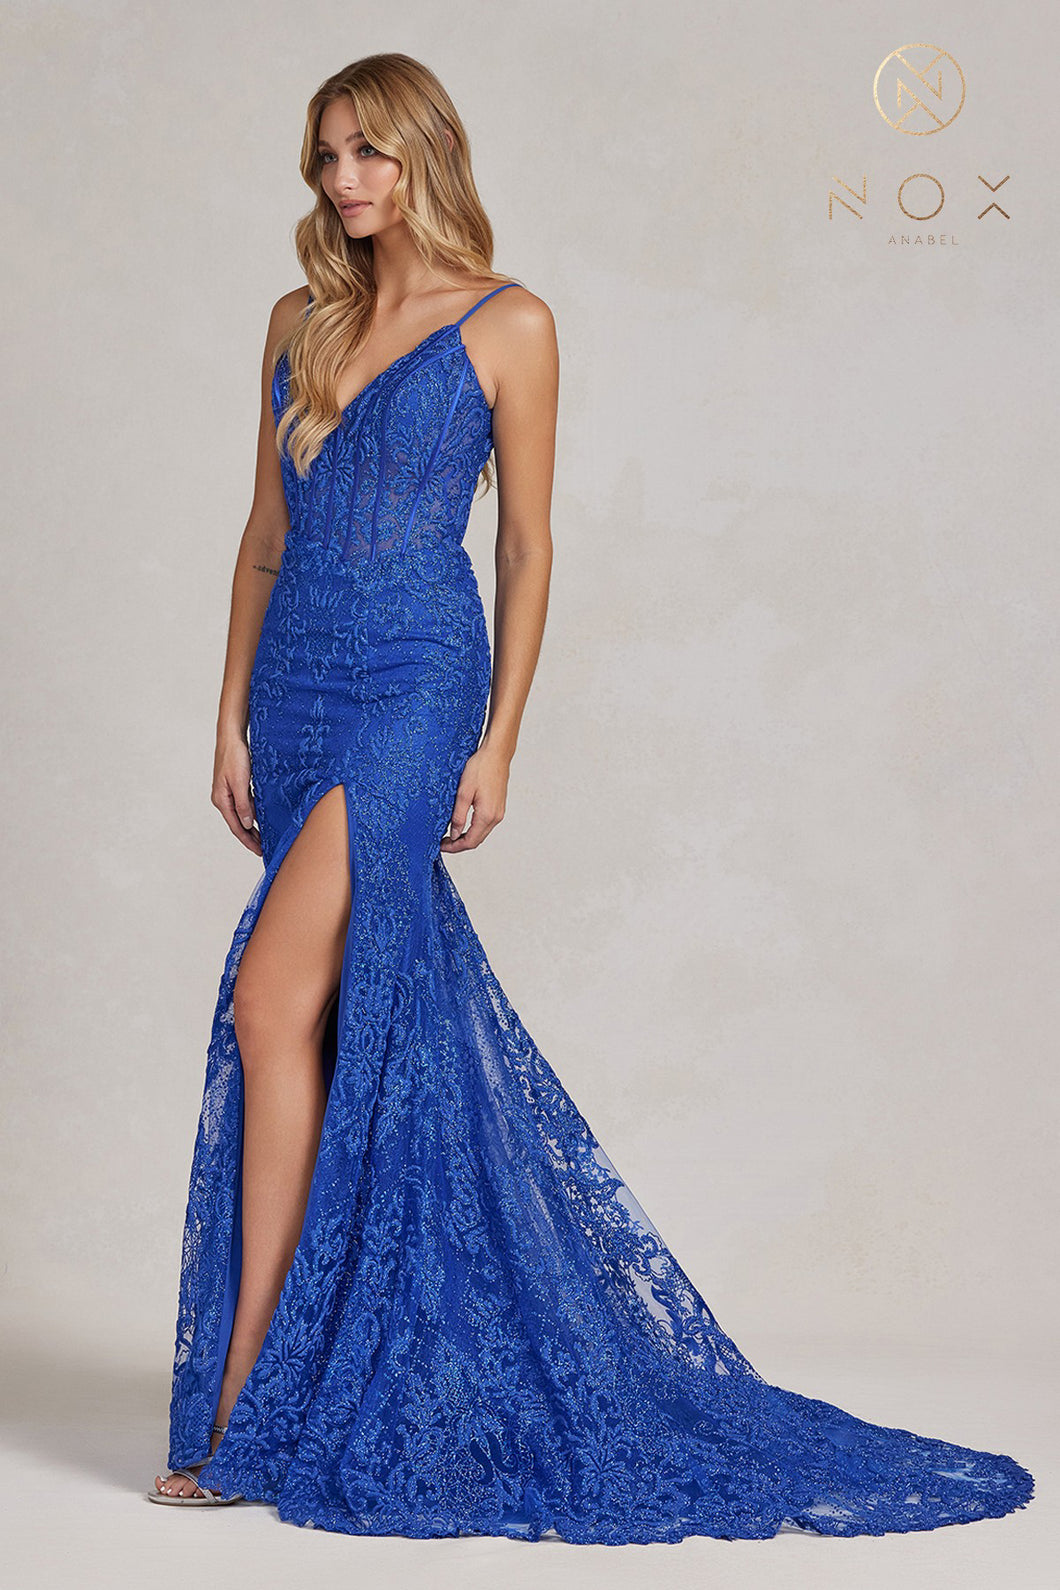 N C1100 - Glitter Print Lace Fit & Flare Prom Gown with Sheer Boned Bodice & Leg Slit Prom Dress Nox 00 ROYAL BLUE 